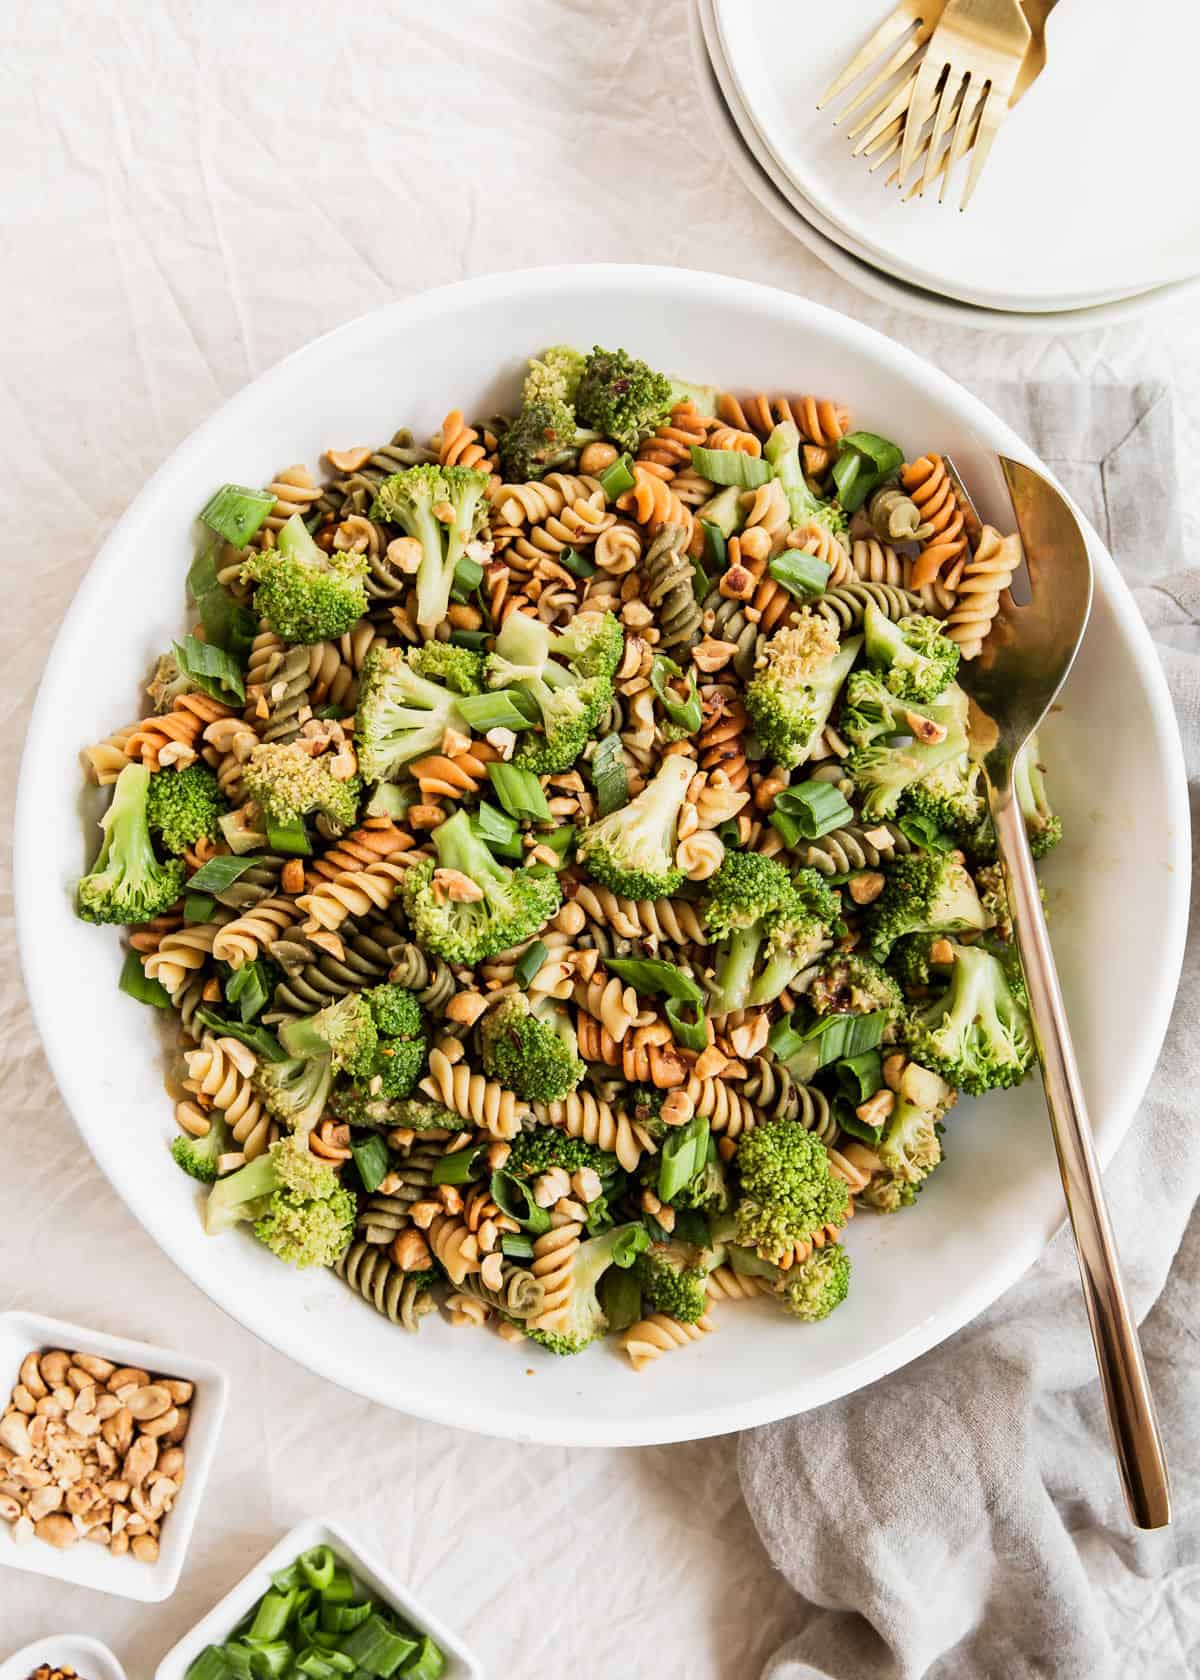 large white bowl with broccoli and pasta salad, large serving spoon, and surrounded by plates and garnish bowls.